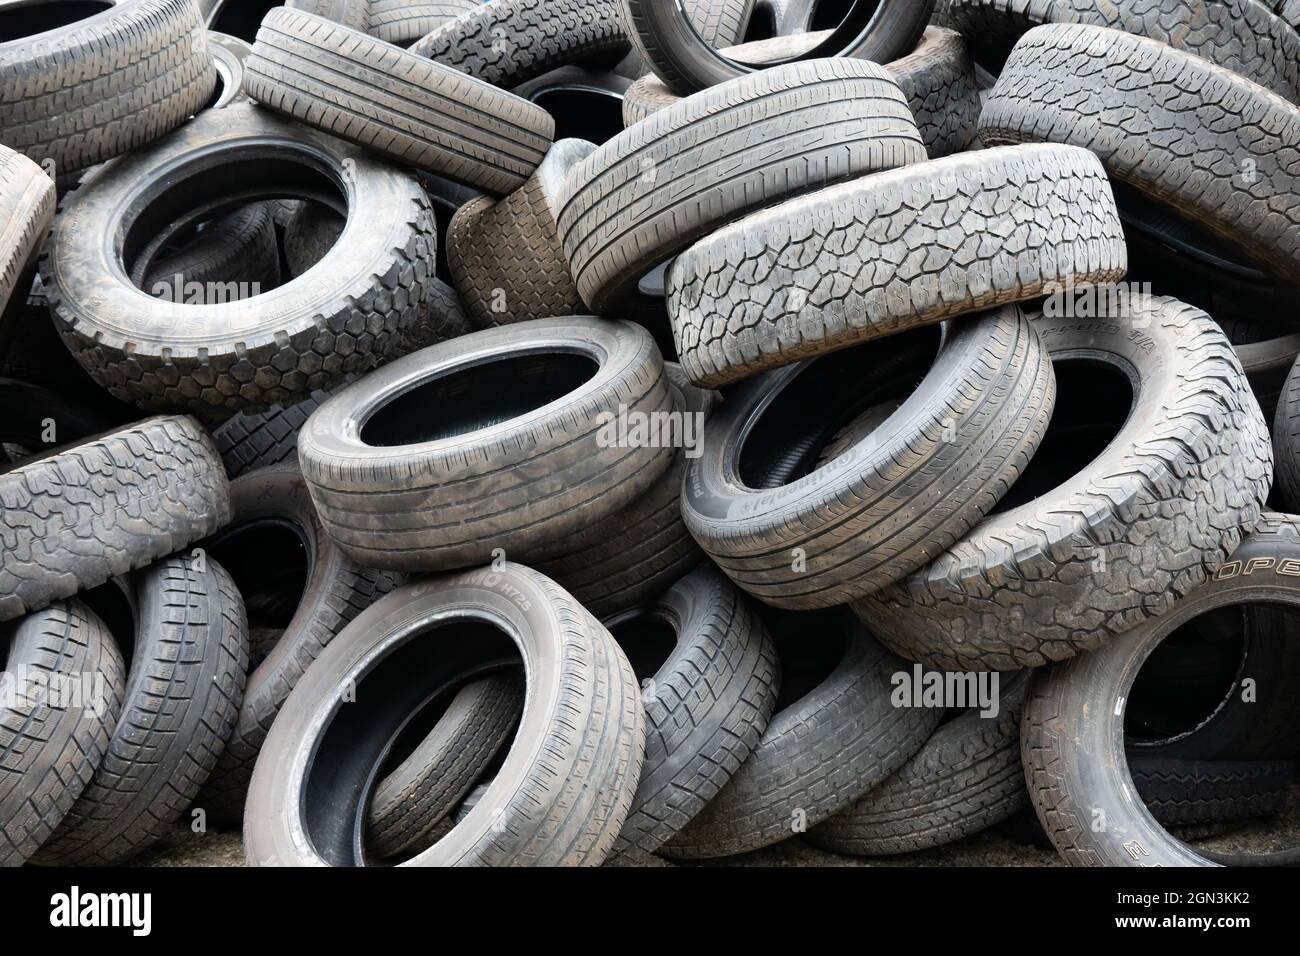 A pile of used worn tires ready for recycling Stock Photo